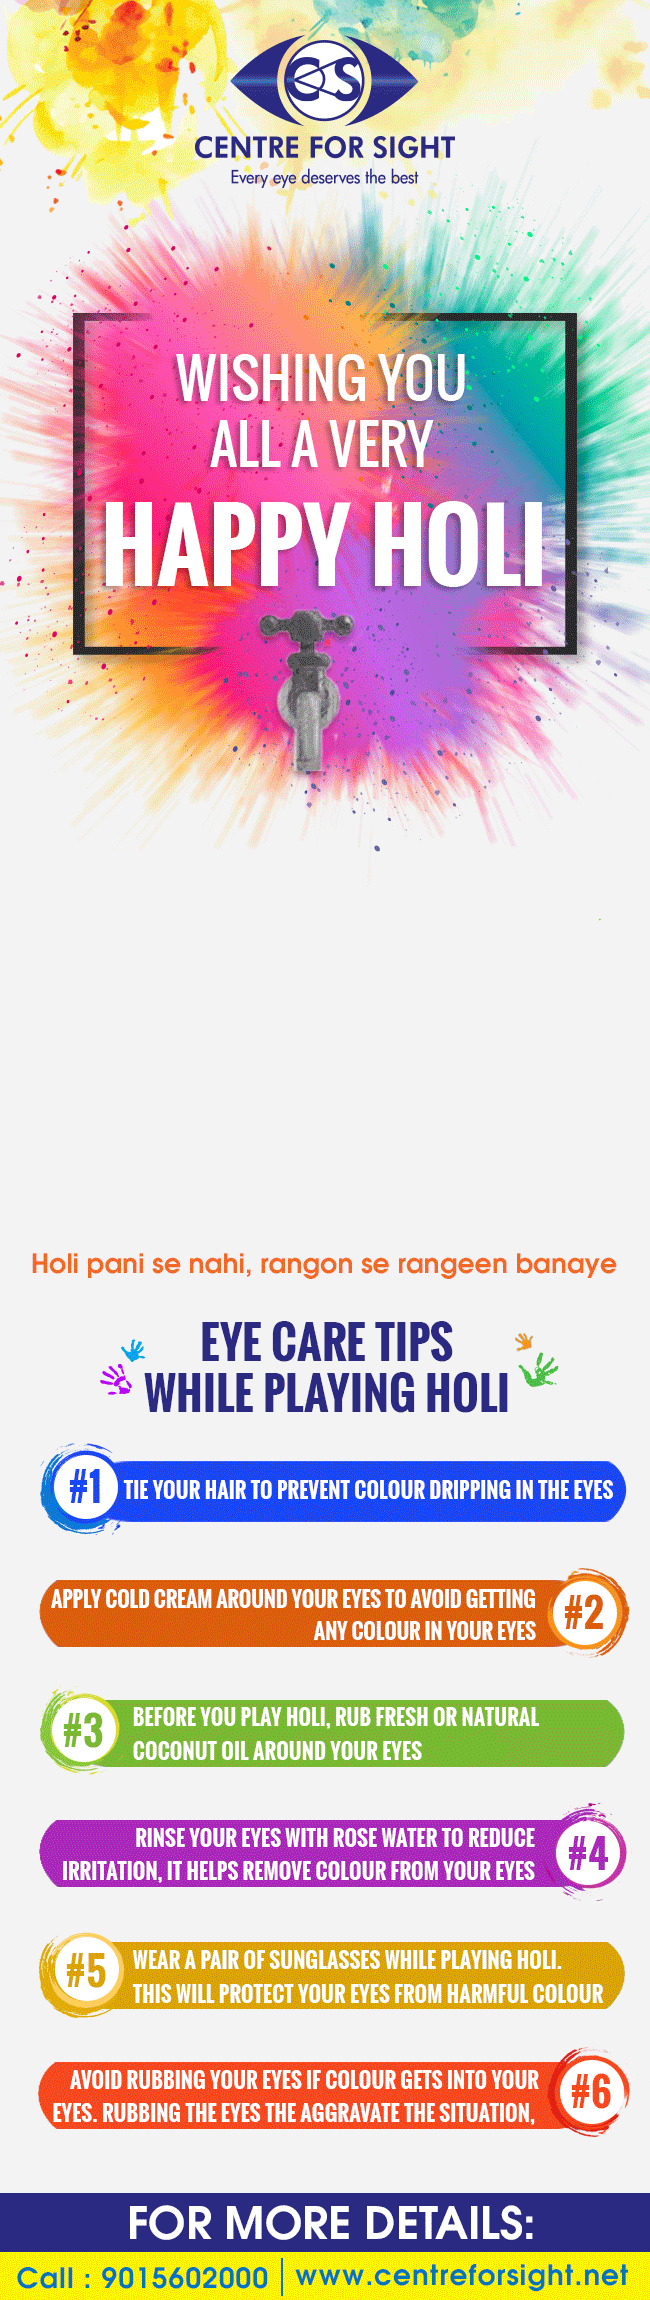 Eye Care Tips While Playing Holi Playing Holi safely should be the first thing on your mind this Holi festival. These eye care tips should also be explained to everyone to keep them aware and alert. by centreforsight